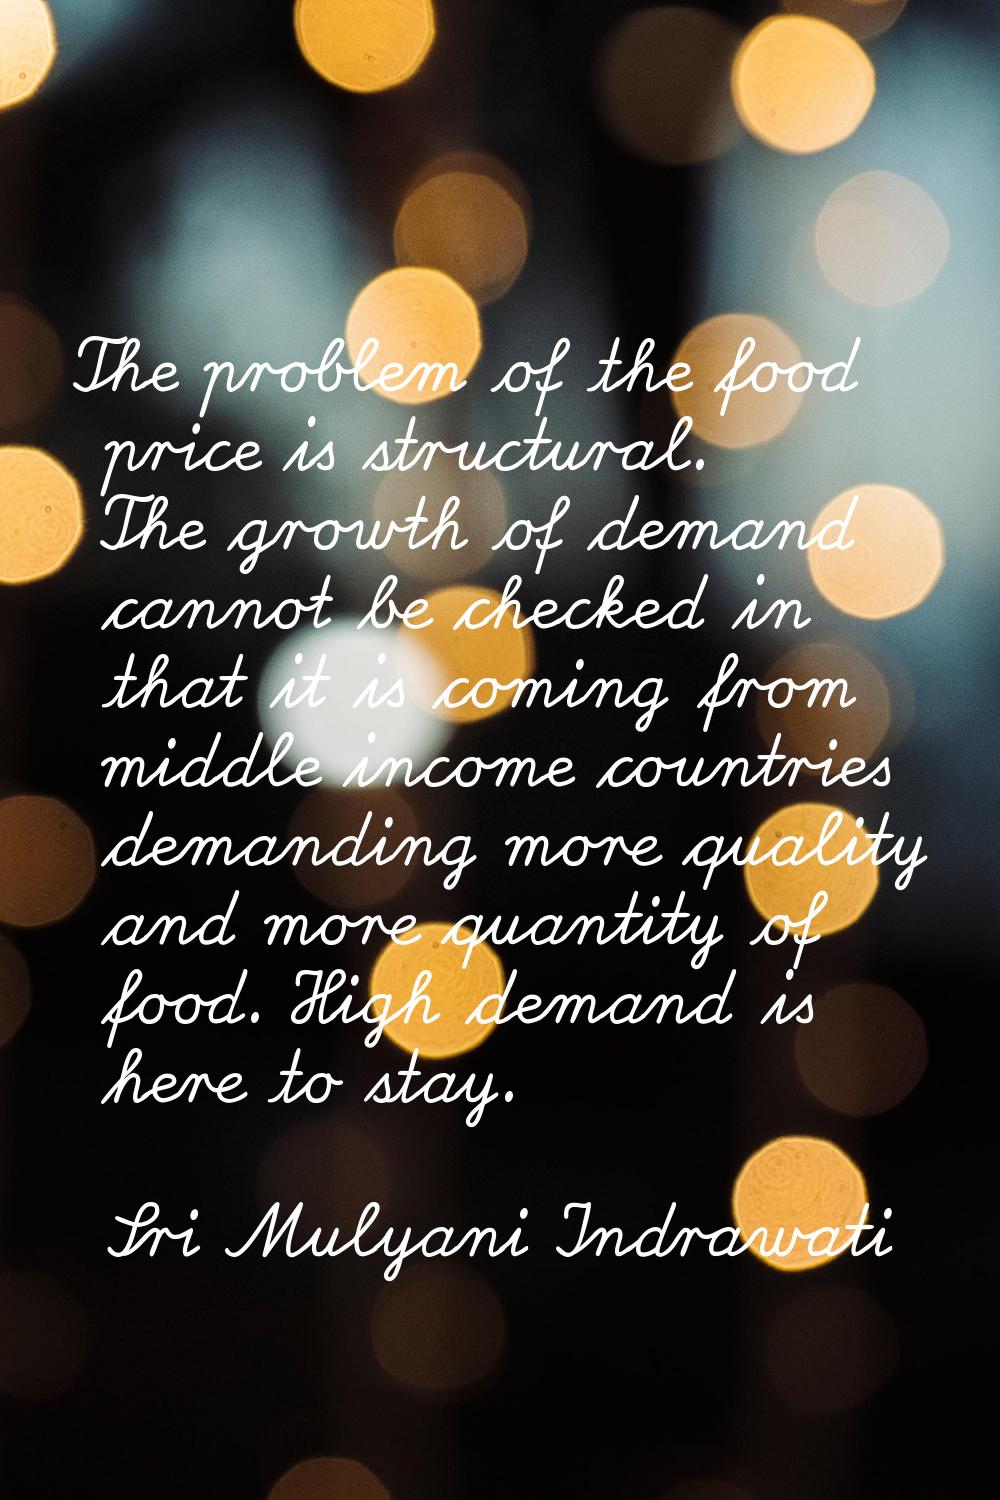 The problem of the food price is structural. The growth of demand cannot be checked in that it is c